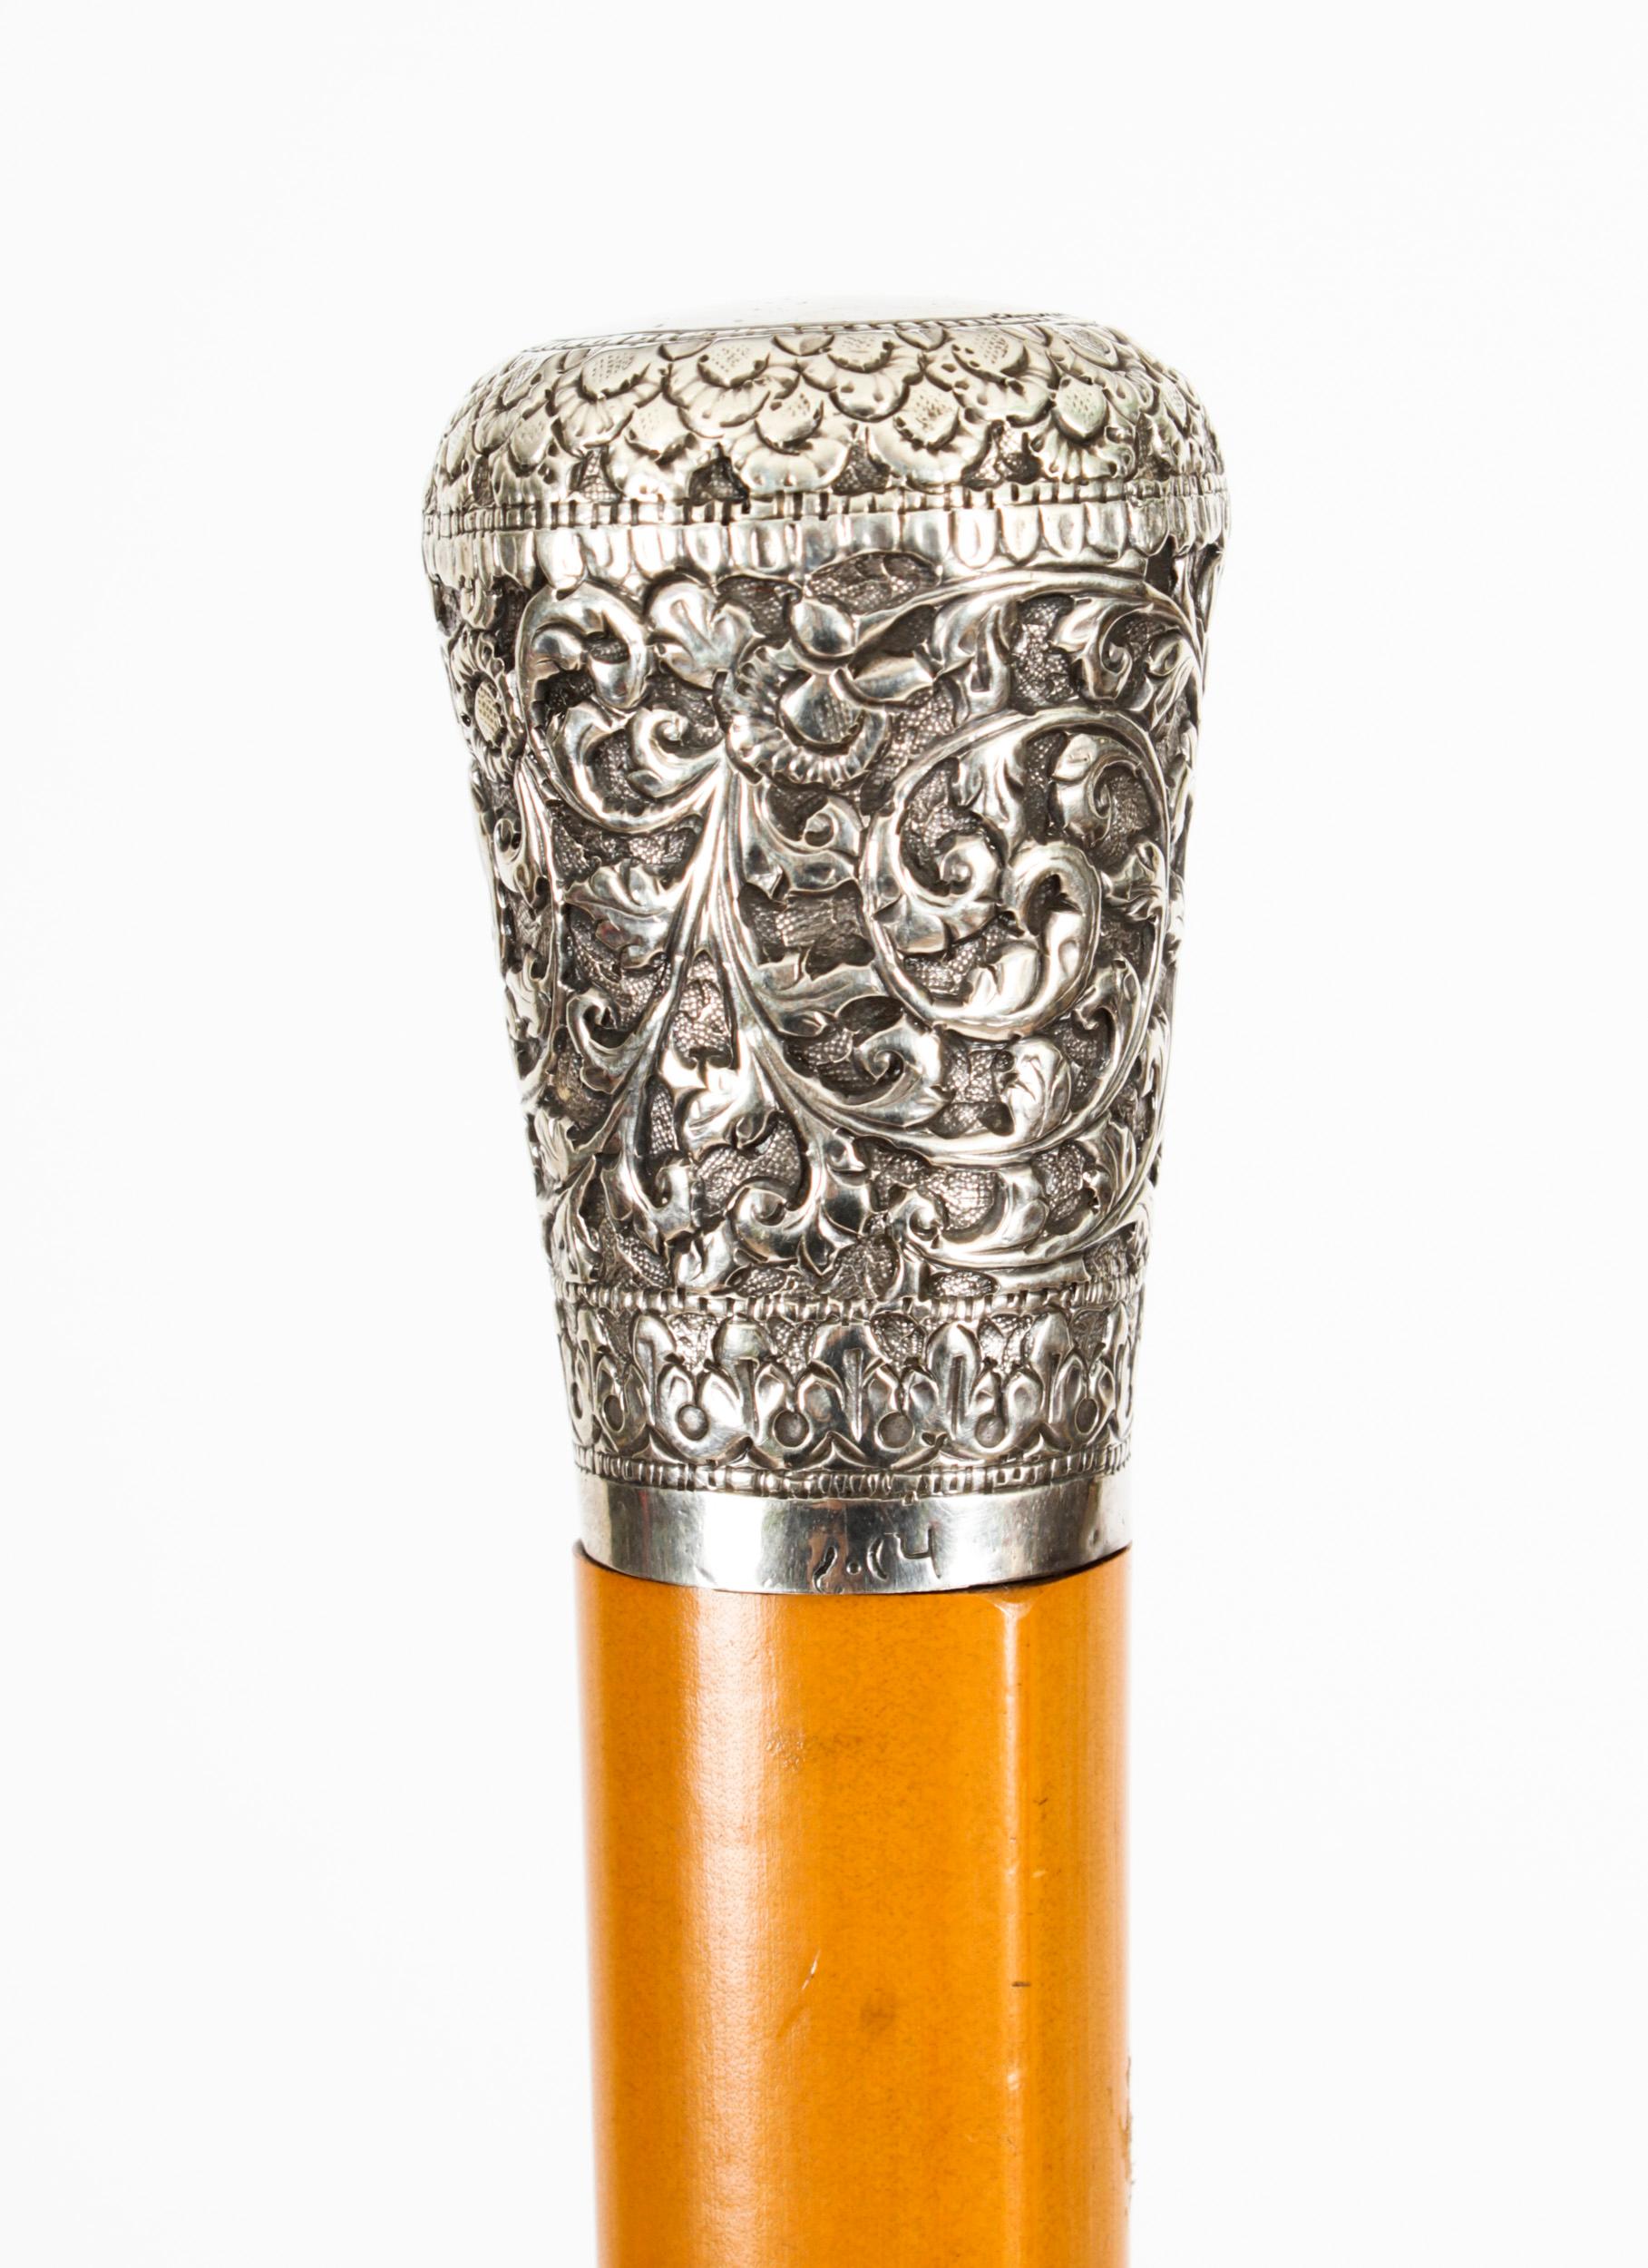 AN Indian silver handled 'system' walking cane
Late 19th century
Decorated with scrolling foliage and fitted with a corkscrew, with signature to base, above a Malacca shaft 89.4cm long
This is a beautiful antique gentleman's Indian silver pommel